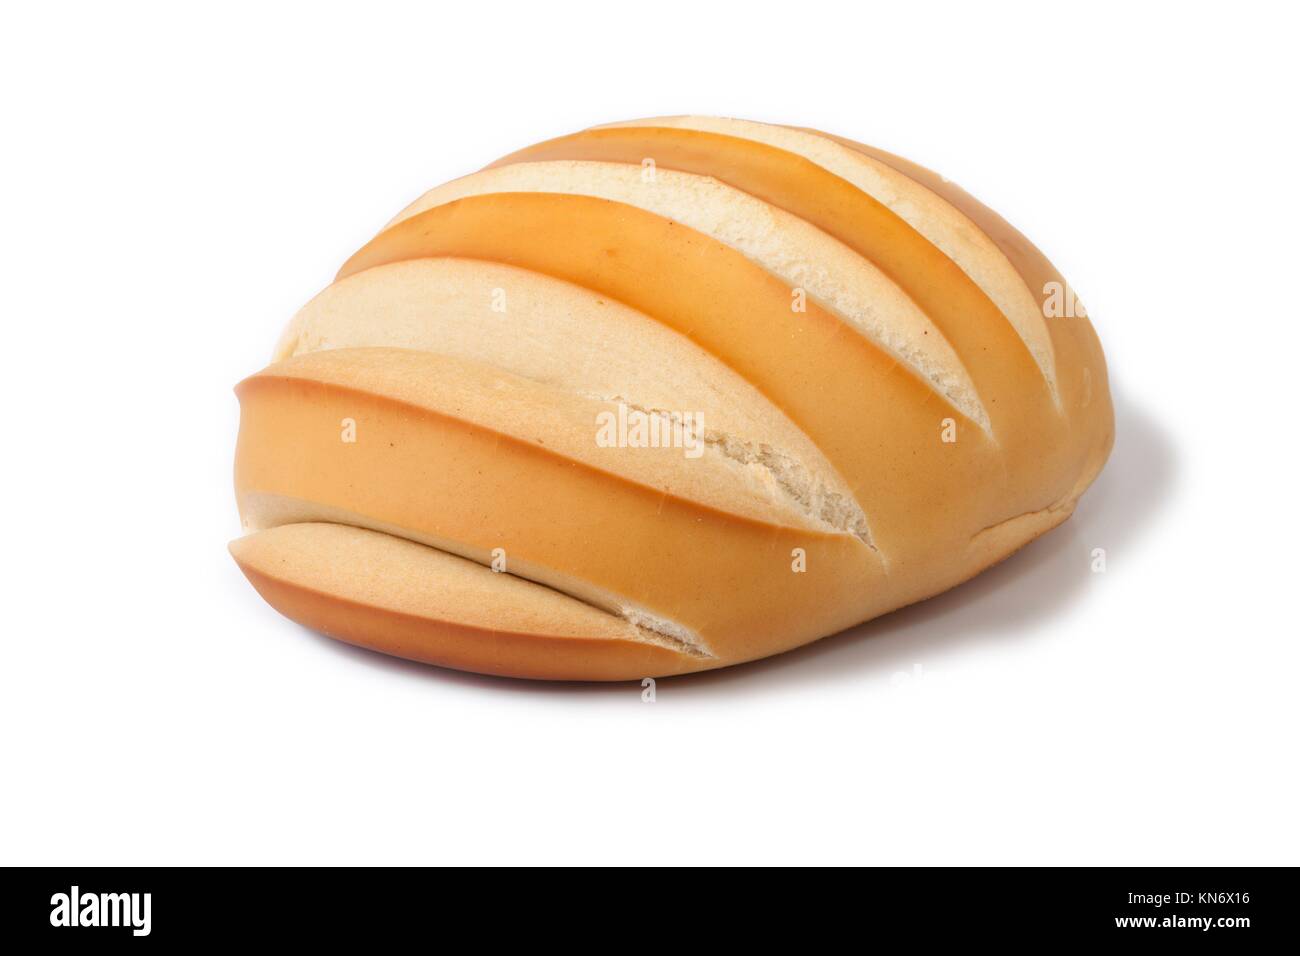 Spanish one kilo bread loaf. Isolated over white background. Stock Photo